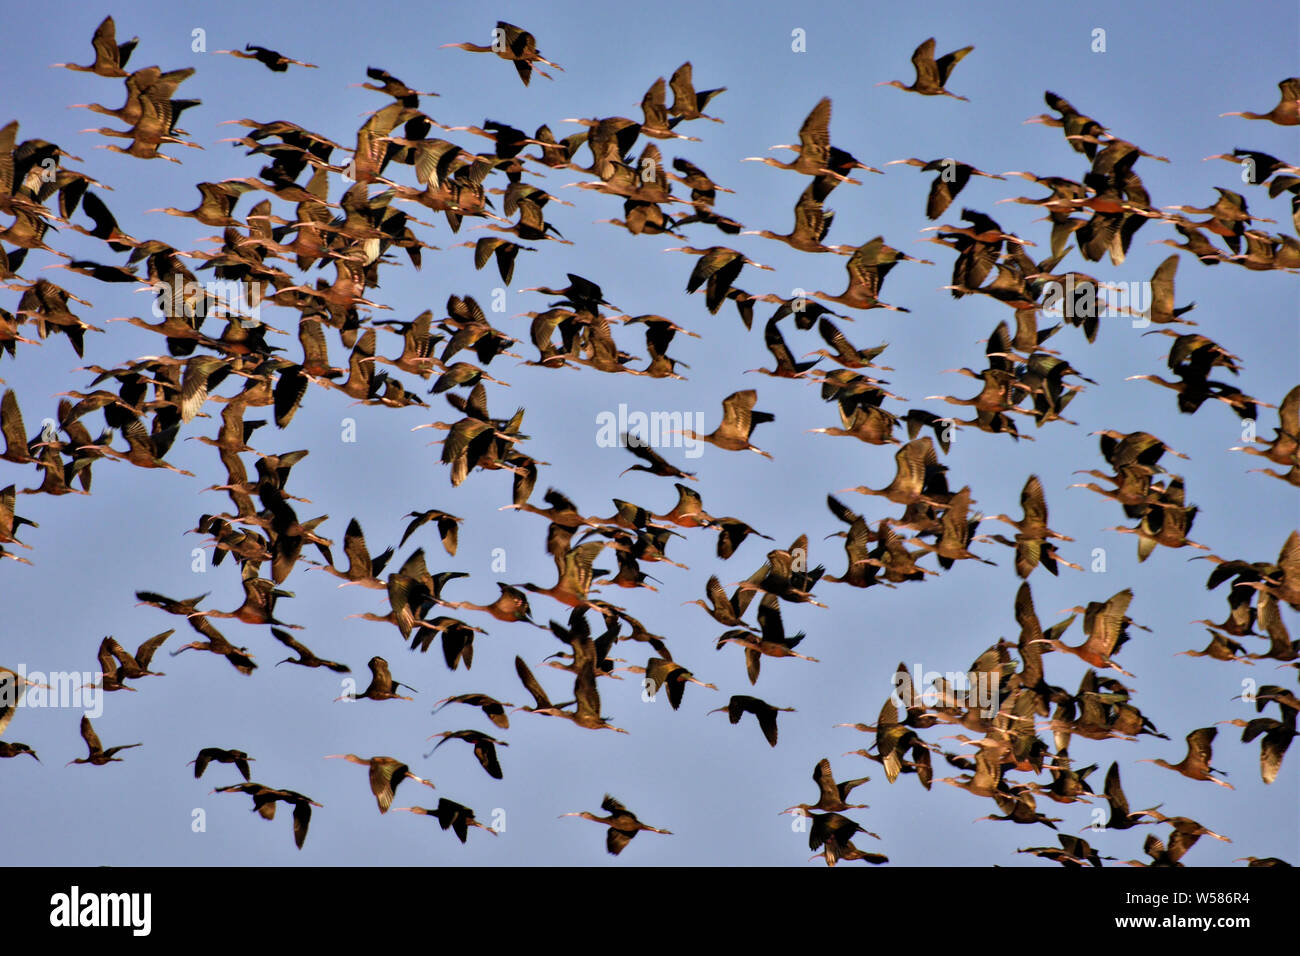 Large group of glossy ibis flying Stock Photo